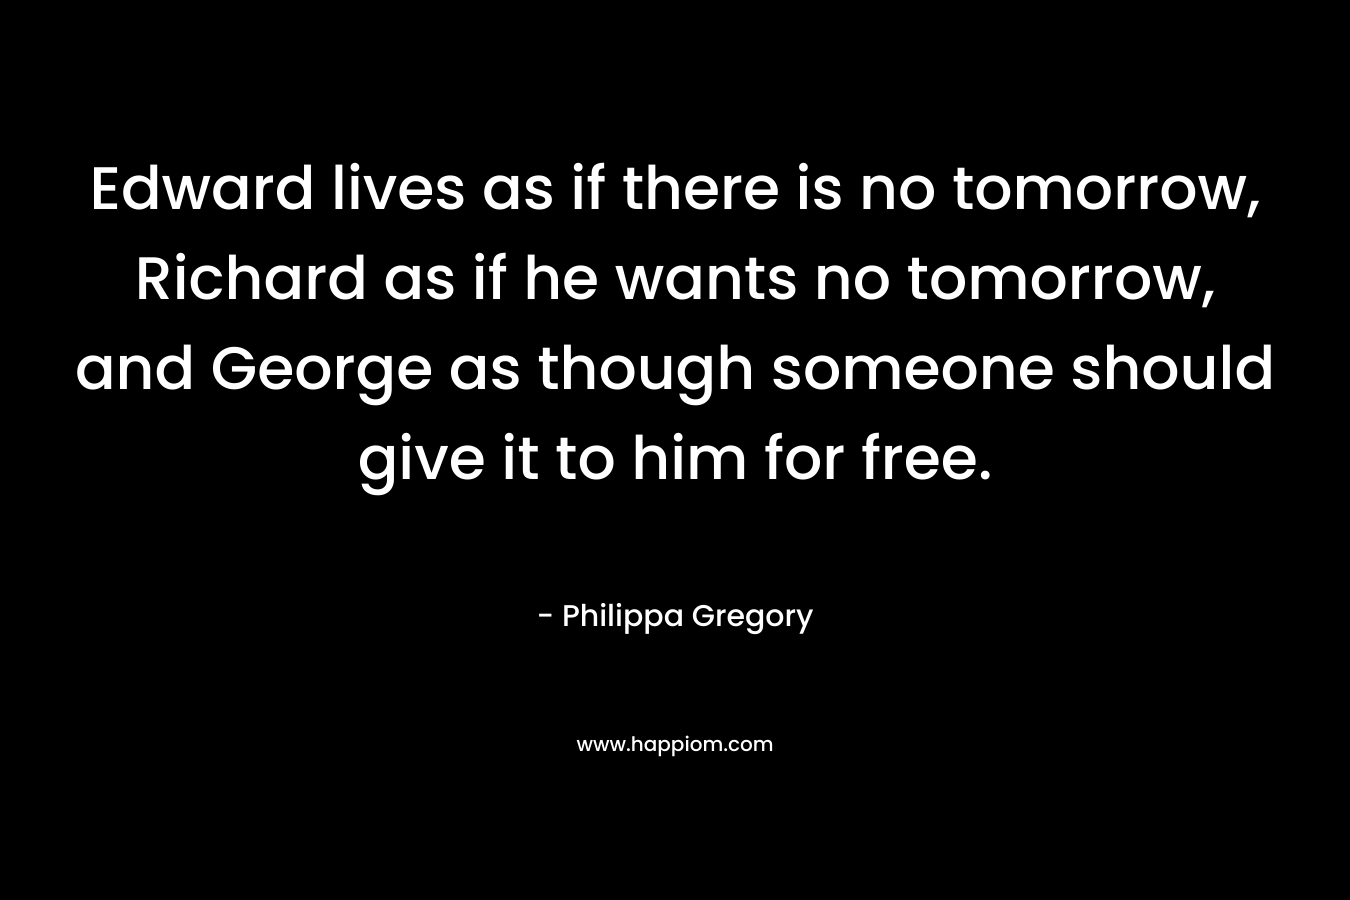 Edward lives as if there is no tomorrow, Richard as if he wants no tomorrow, and George as though someone should give it to him for free.